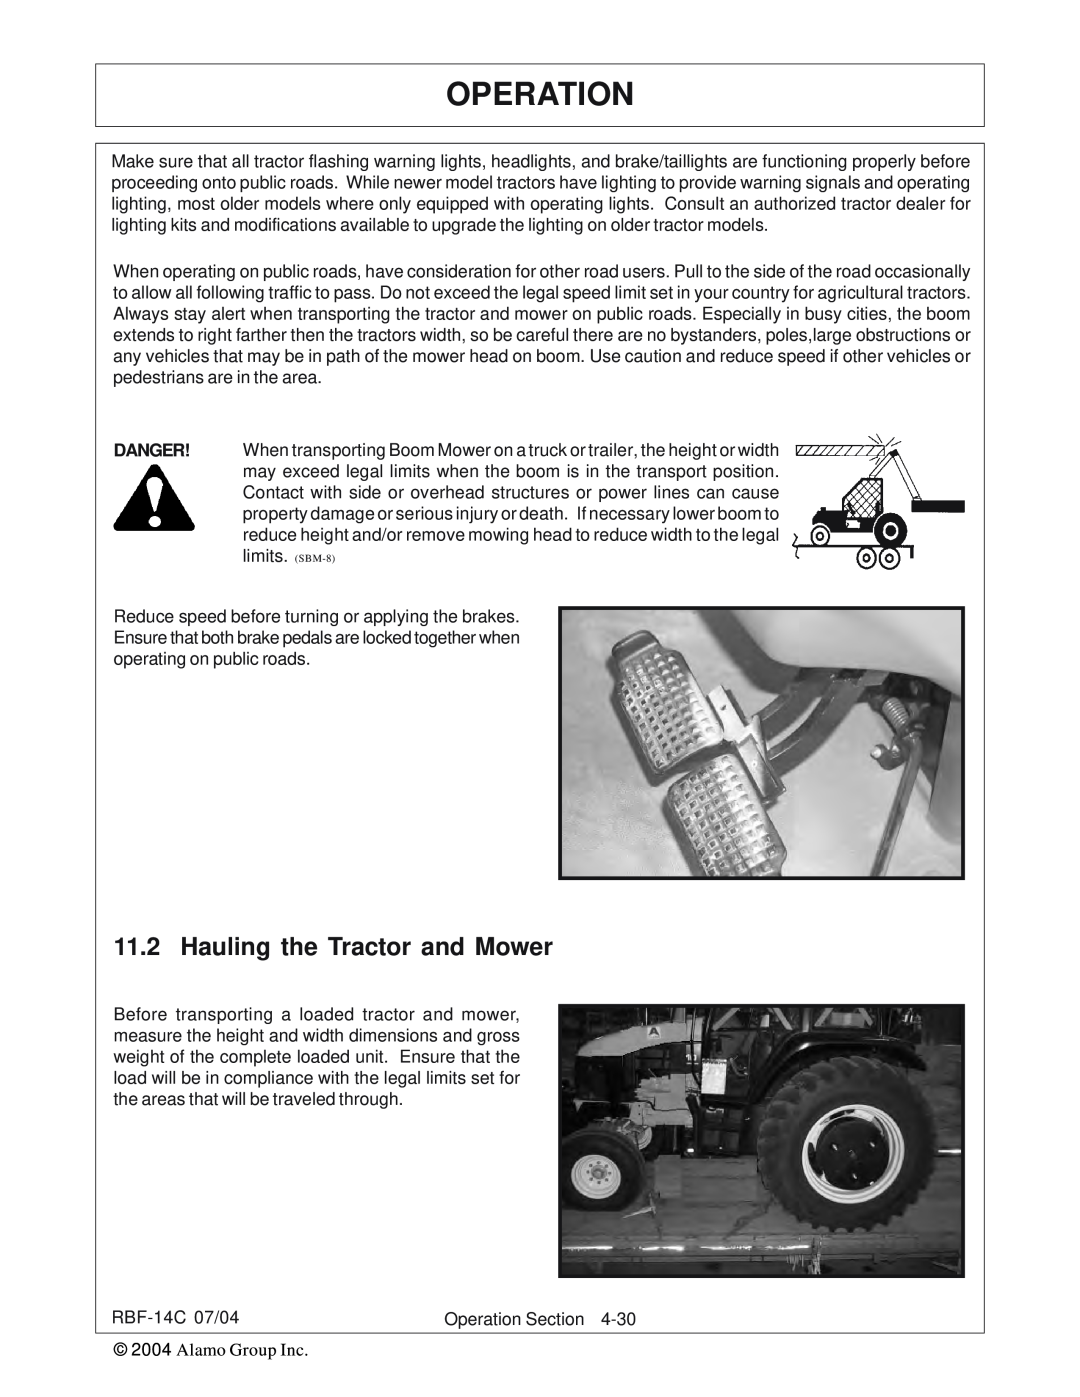 Tiger RBF-14C manual Operation, Hauling the Tractor and Mower 